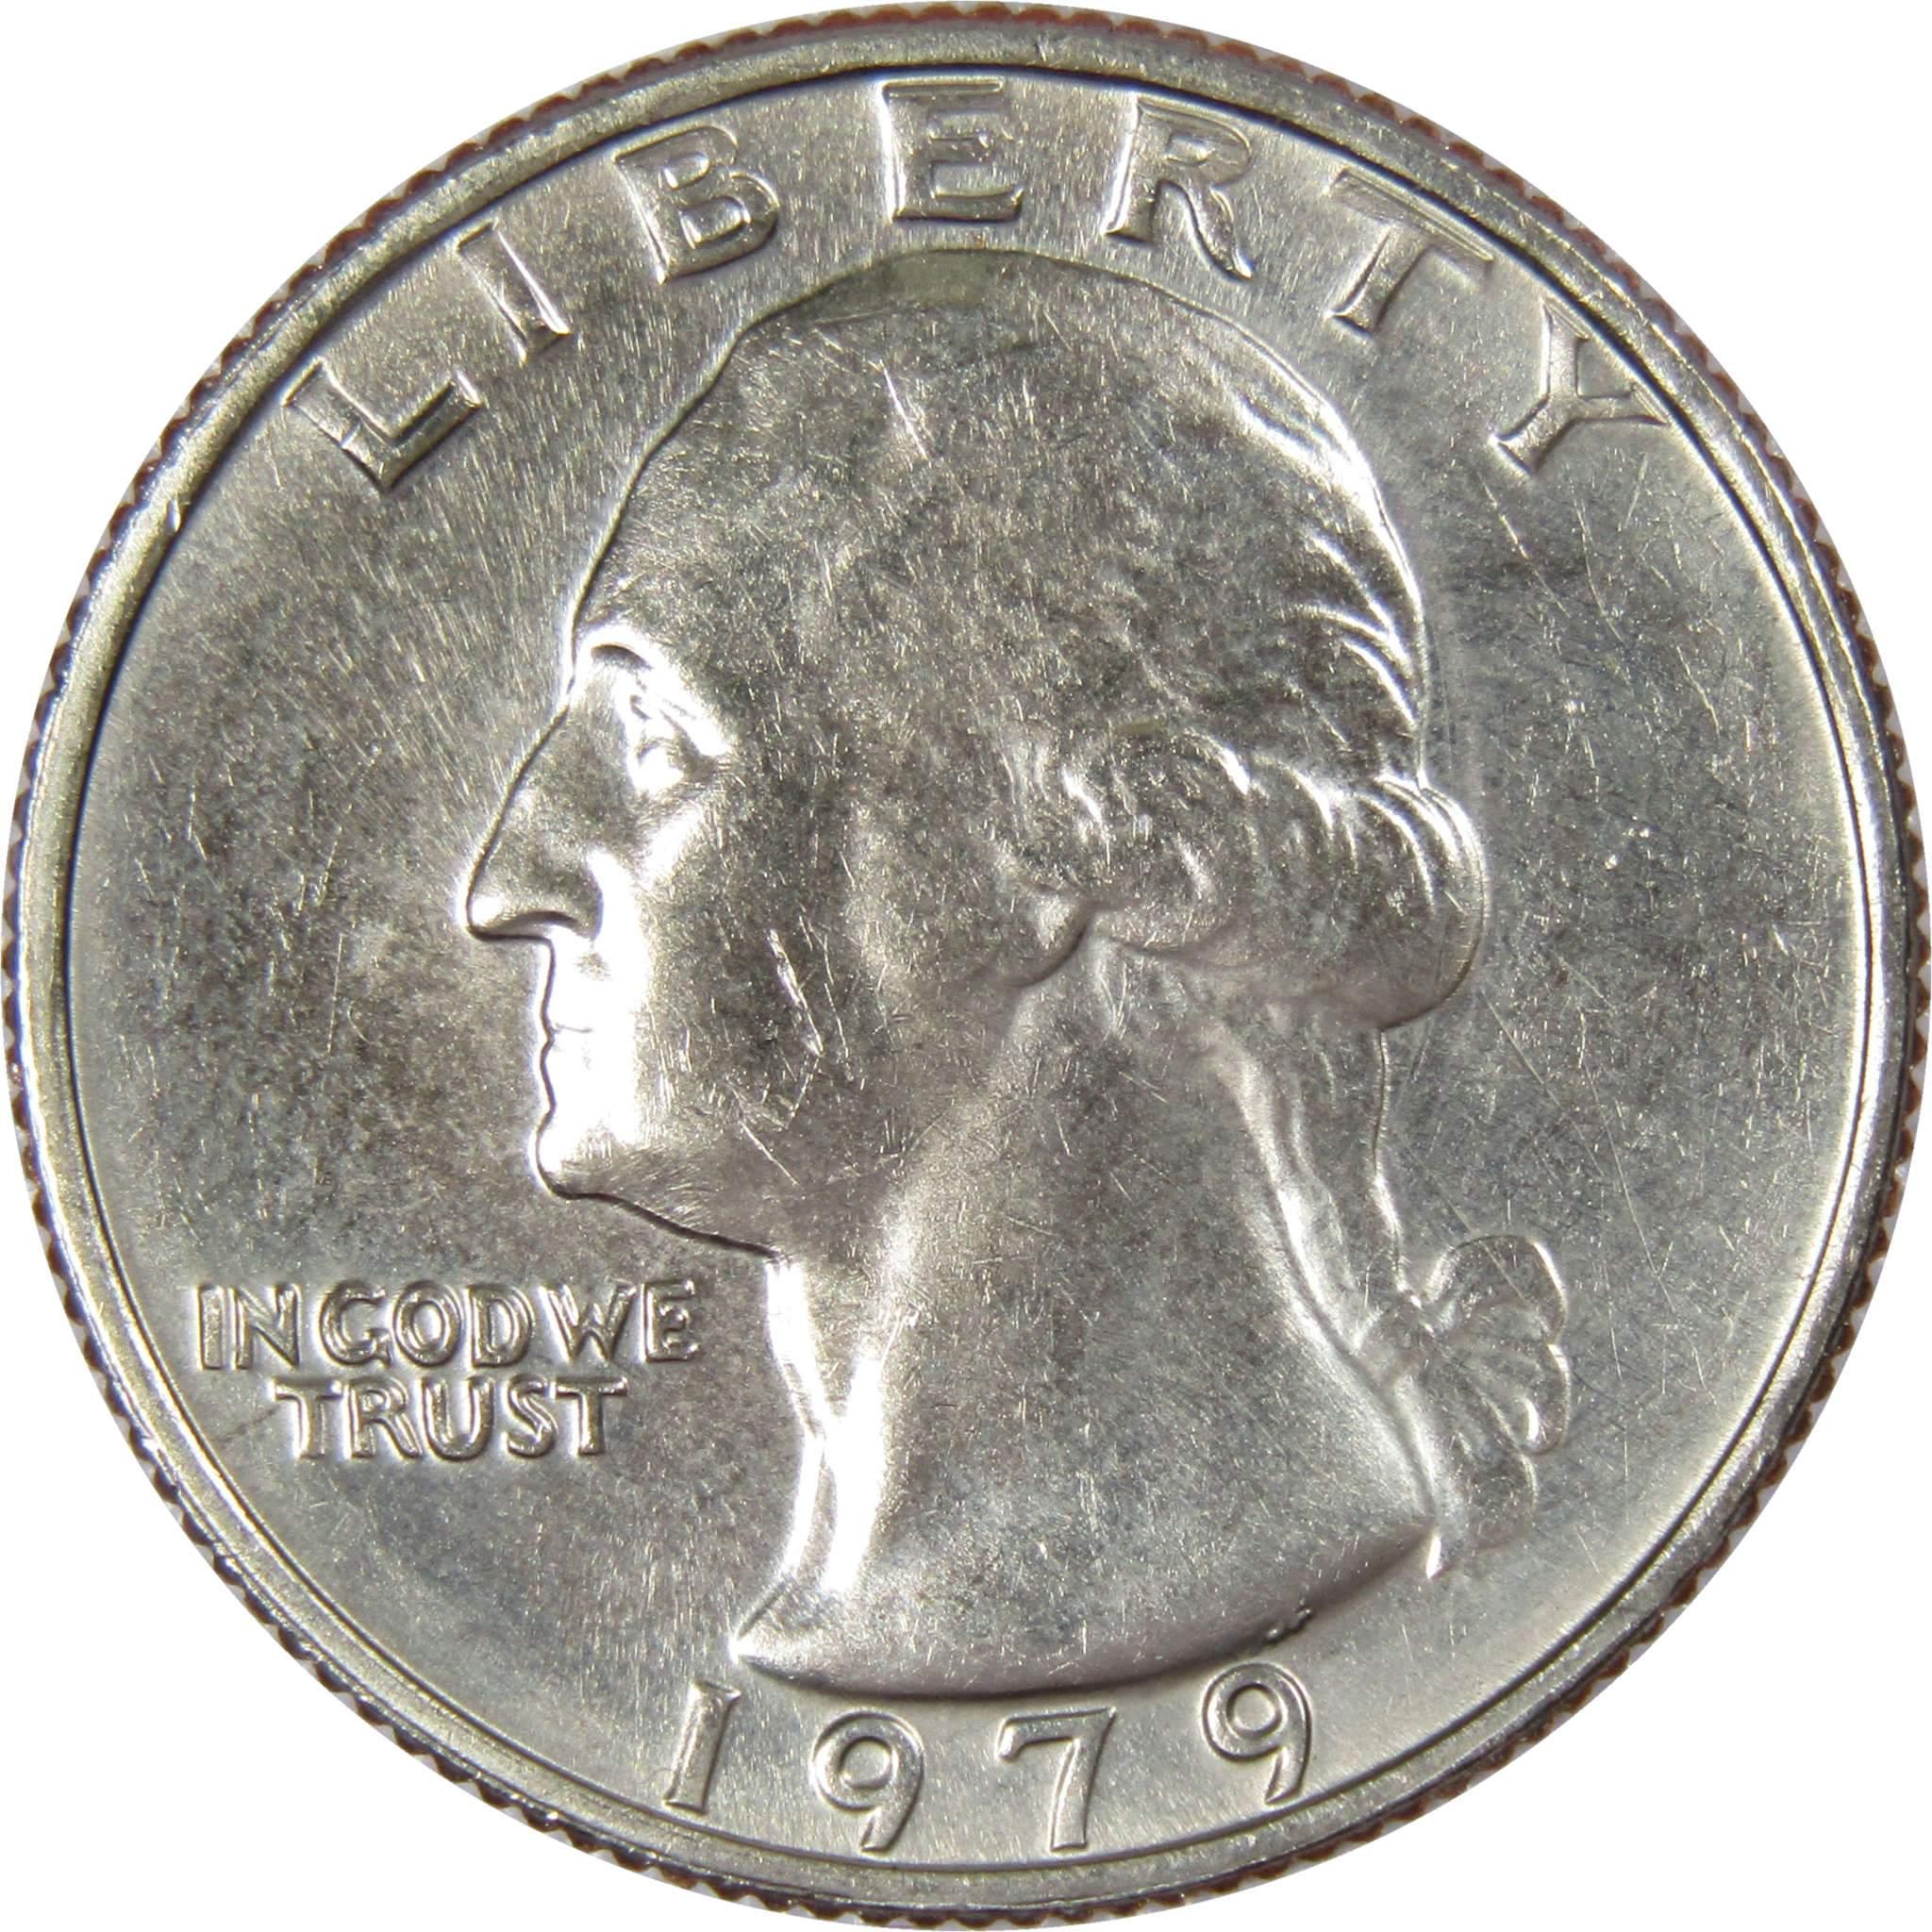 1979 Washington Quarter BU Uncirculated Mint State 25c US Coin Collectible